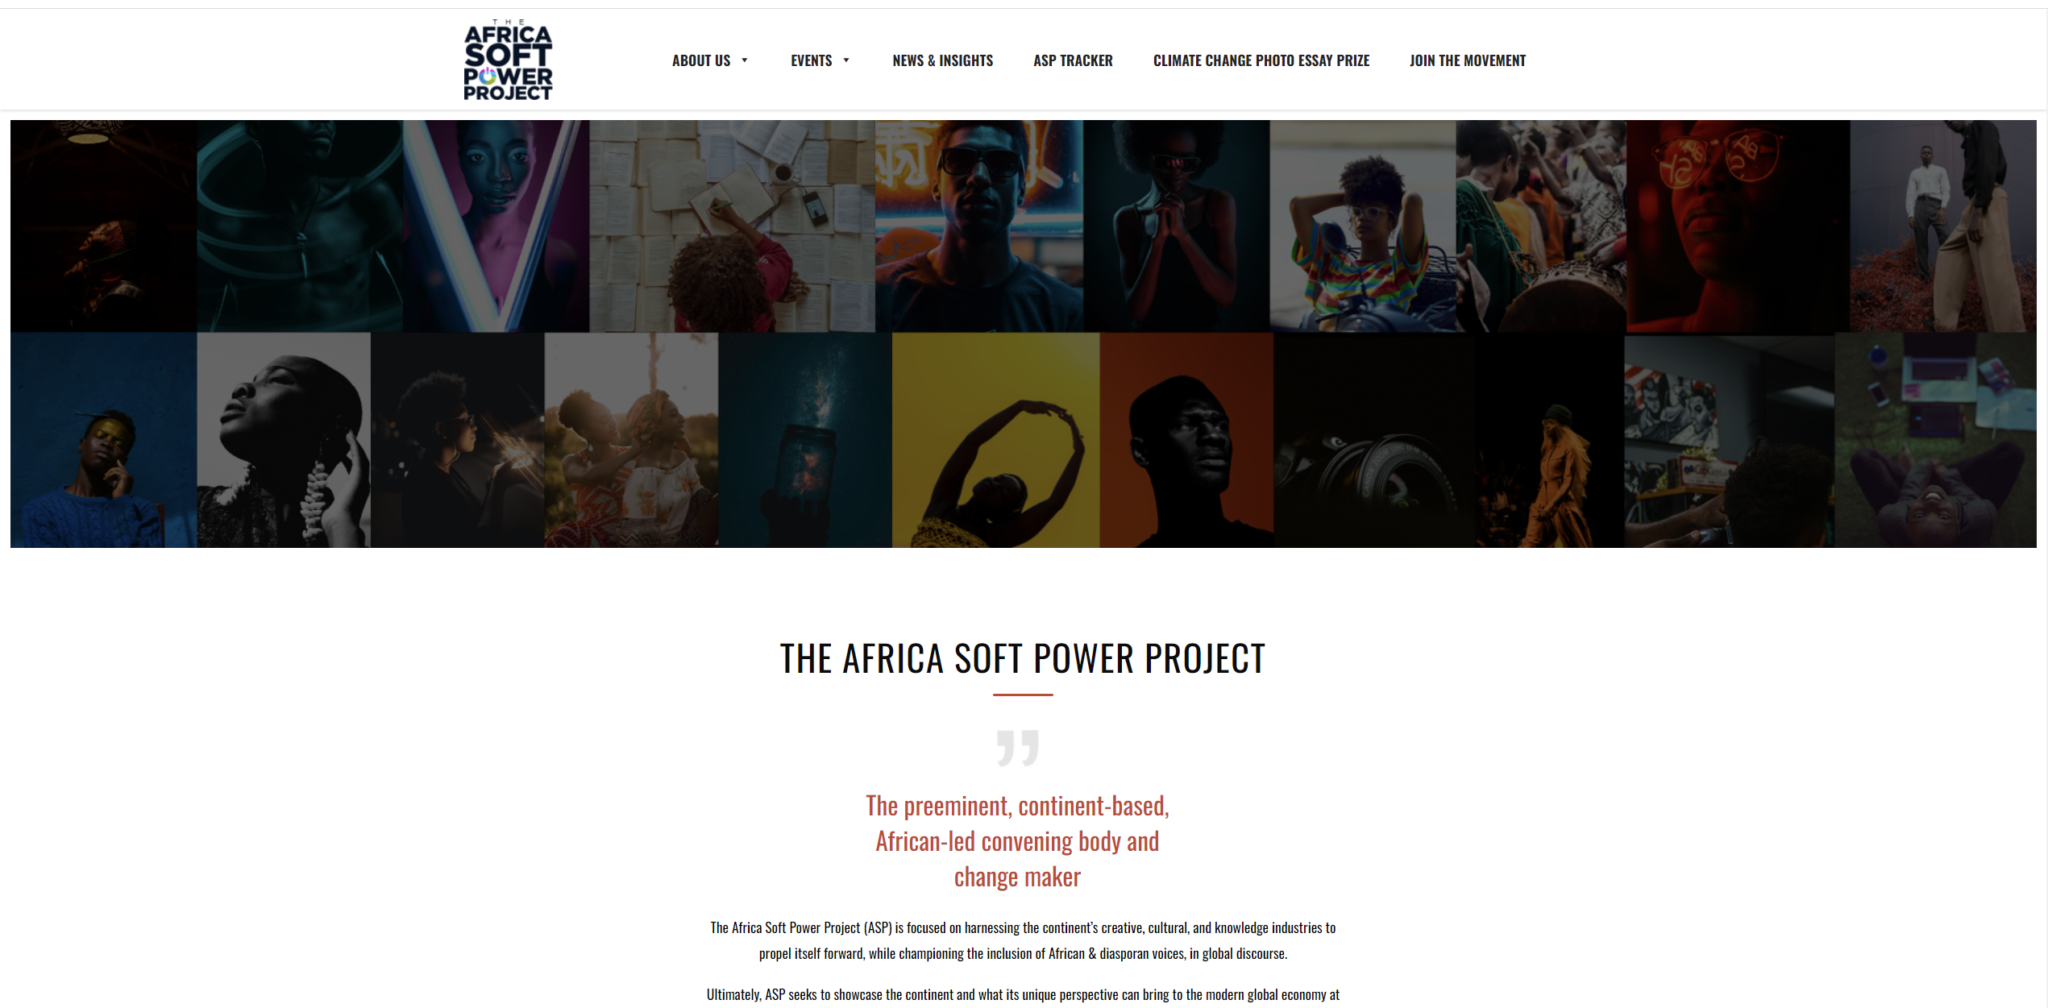 The Africa Soft Power Project is shortened as ASP, it is known as the preeminent, continent-based, African-led convening body and change maker